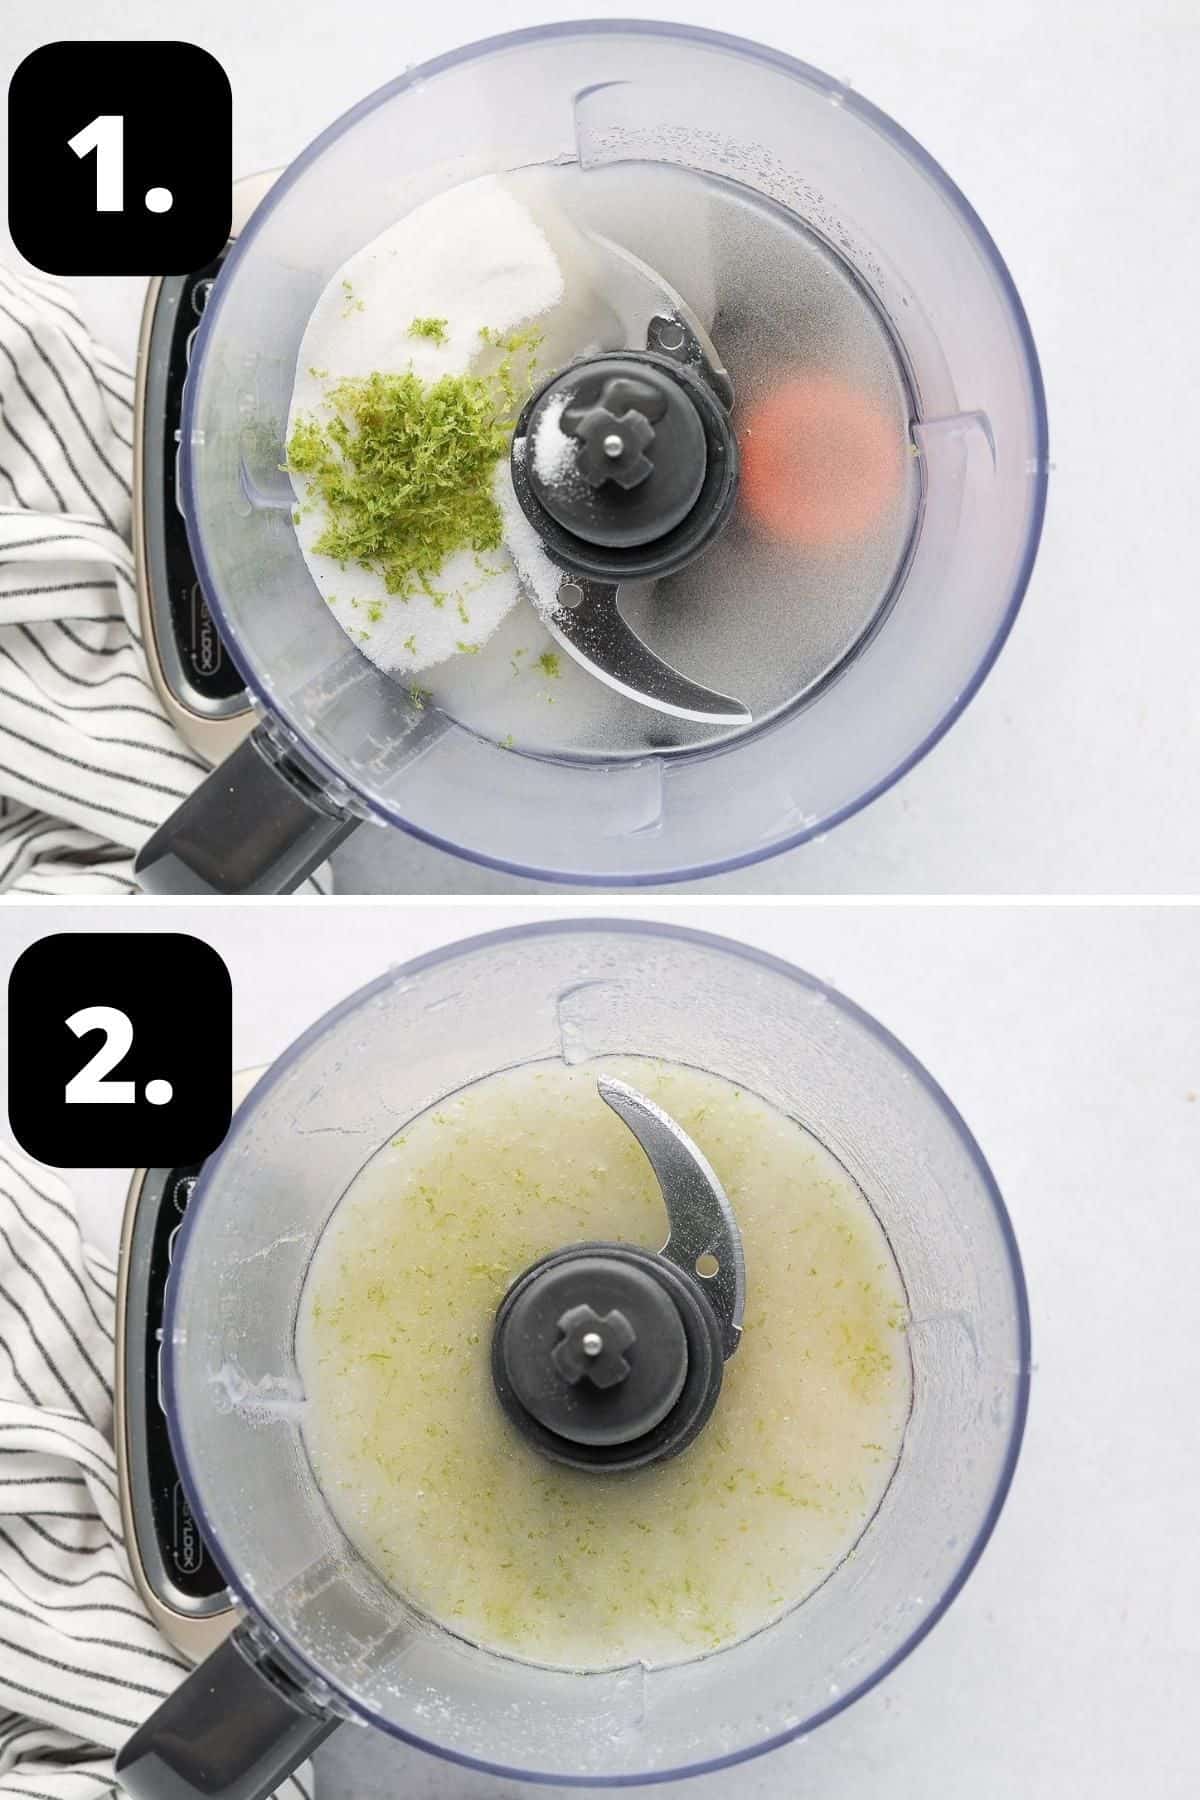 Steps 1-2 of preparing this recipe - the sugar, zest and juice in a food processor and the blended mixture.